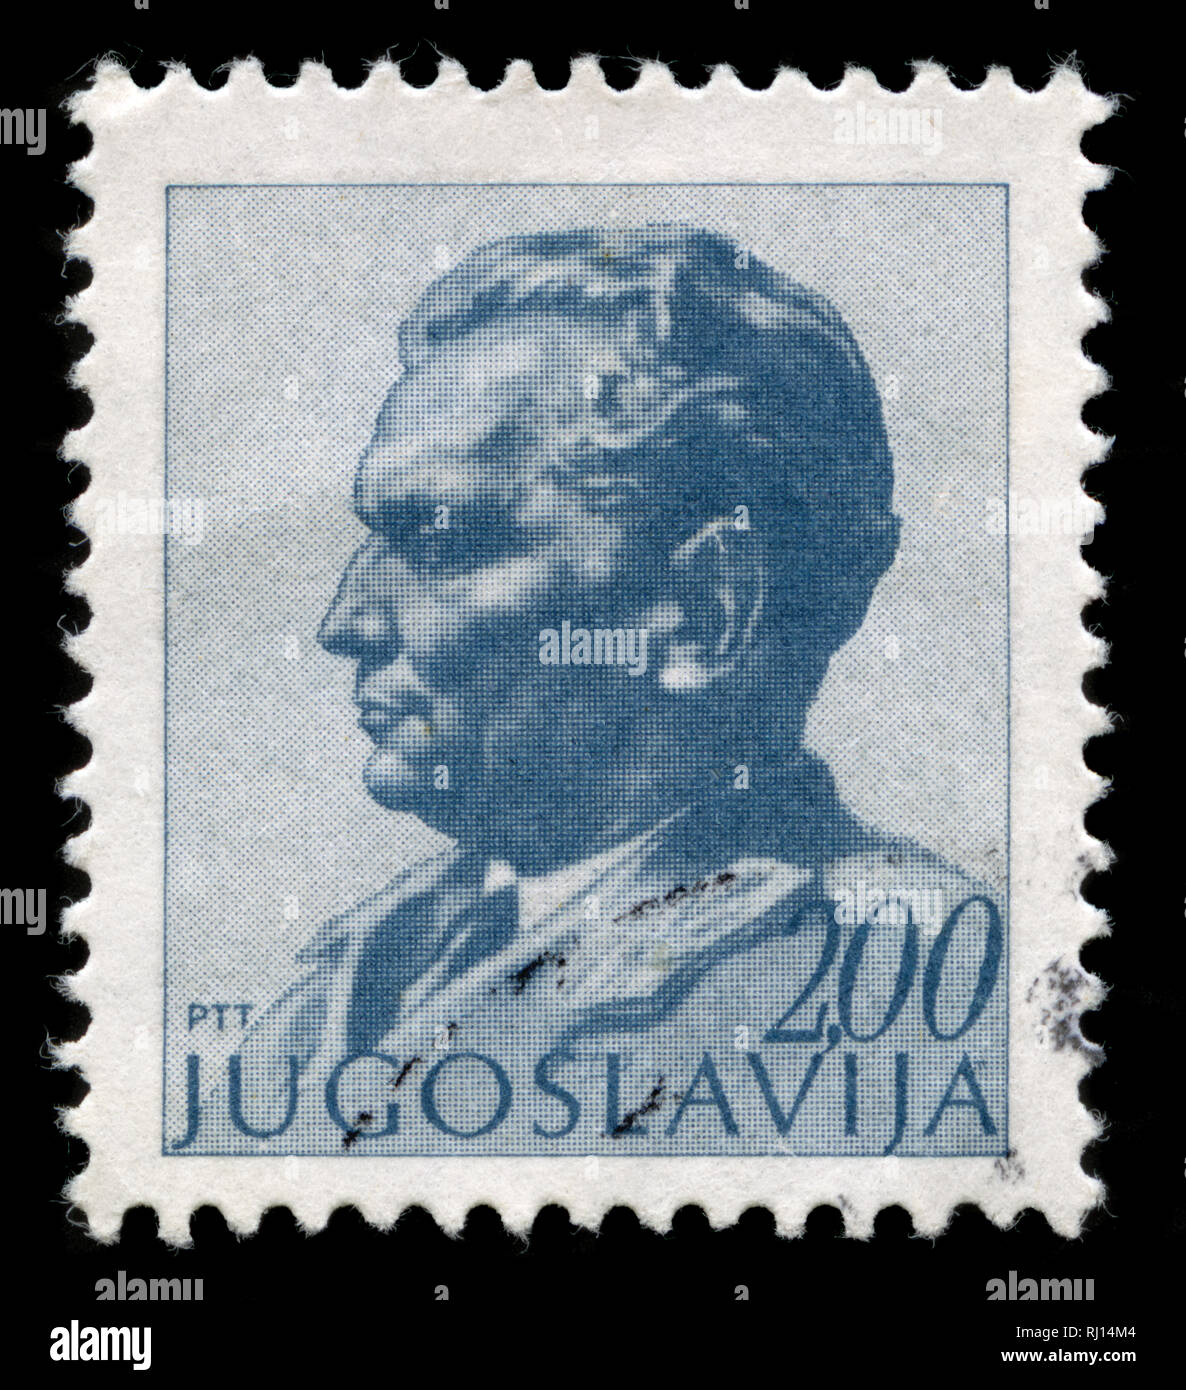 Postage stamp from the former state of Yugoslavia in the President Tito series issued in 1974 Stock Photo